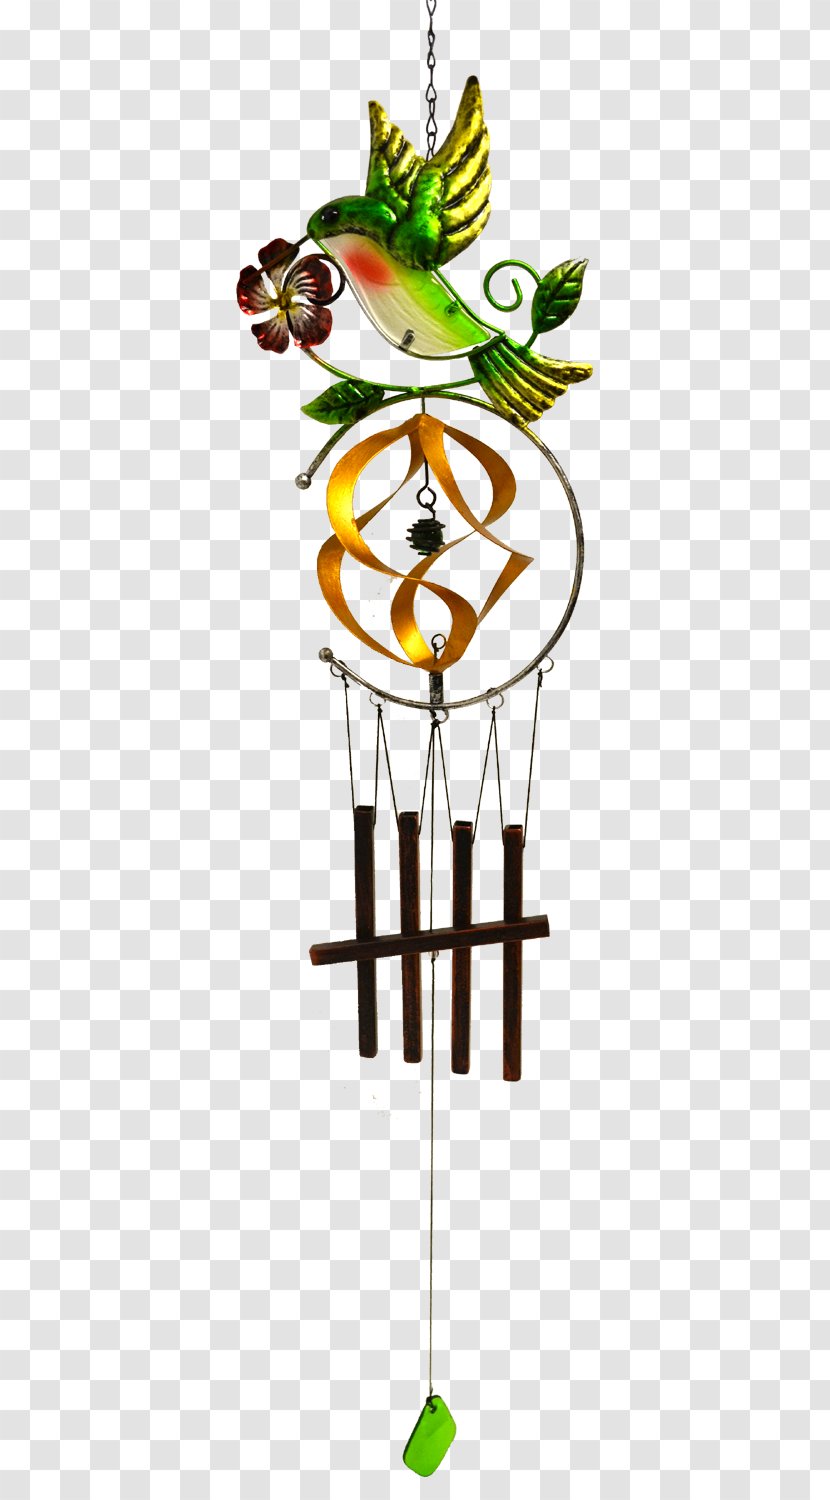 Great World Company Hummingbird Stained Glass With Spiral Wind Chime Clip Art Illustration Flower - Fiction - Garden Signs Transparent PNG